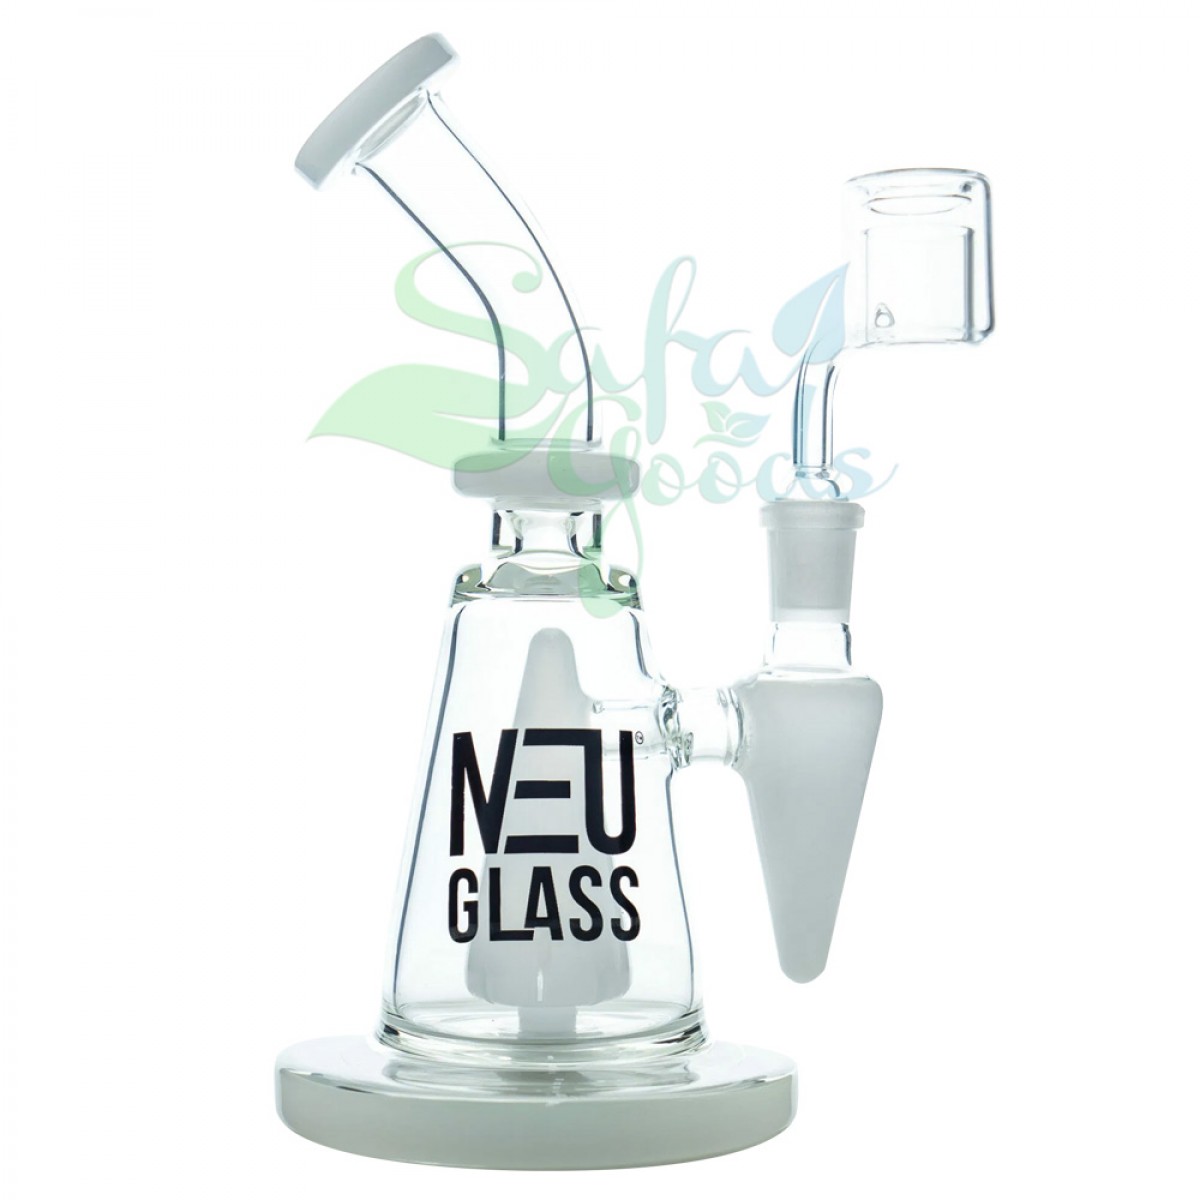 8 in. NeuGlass Rig with Pyramid